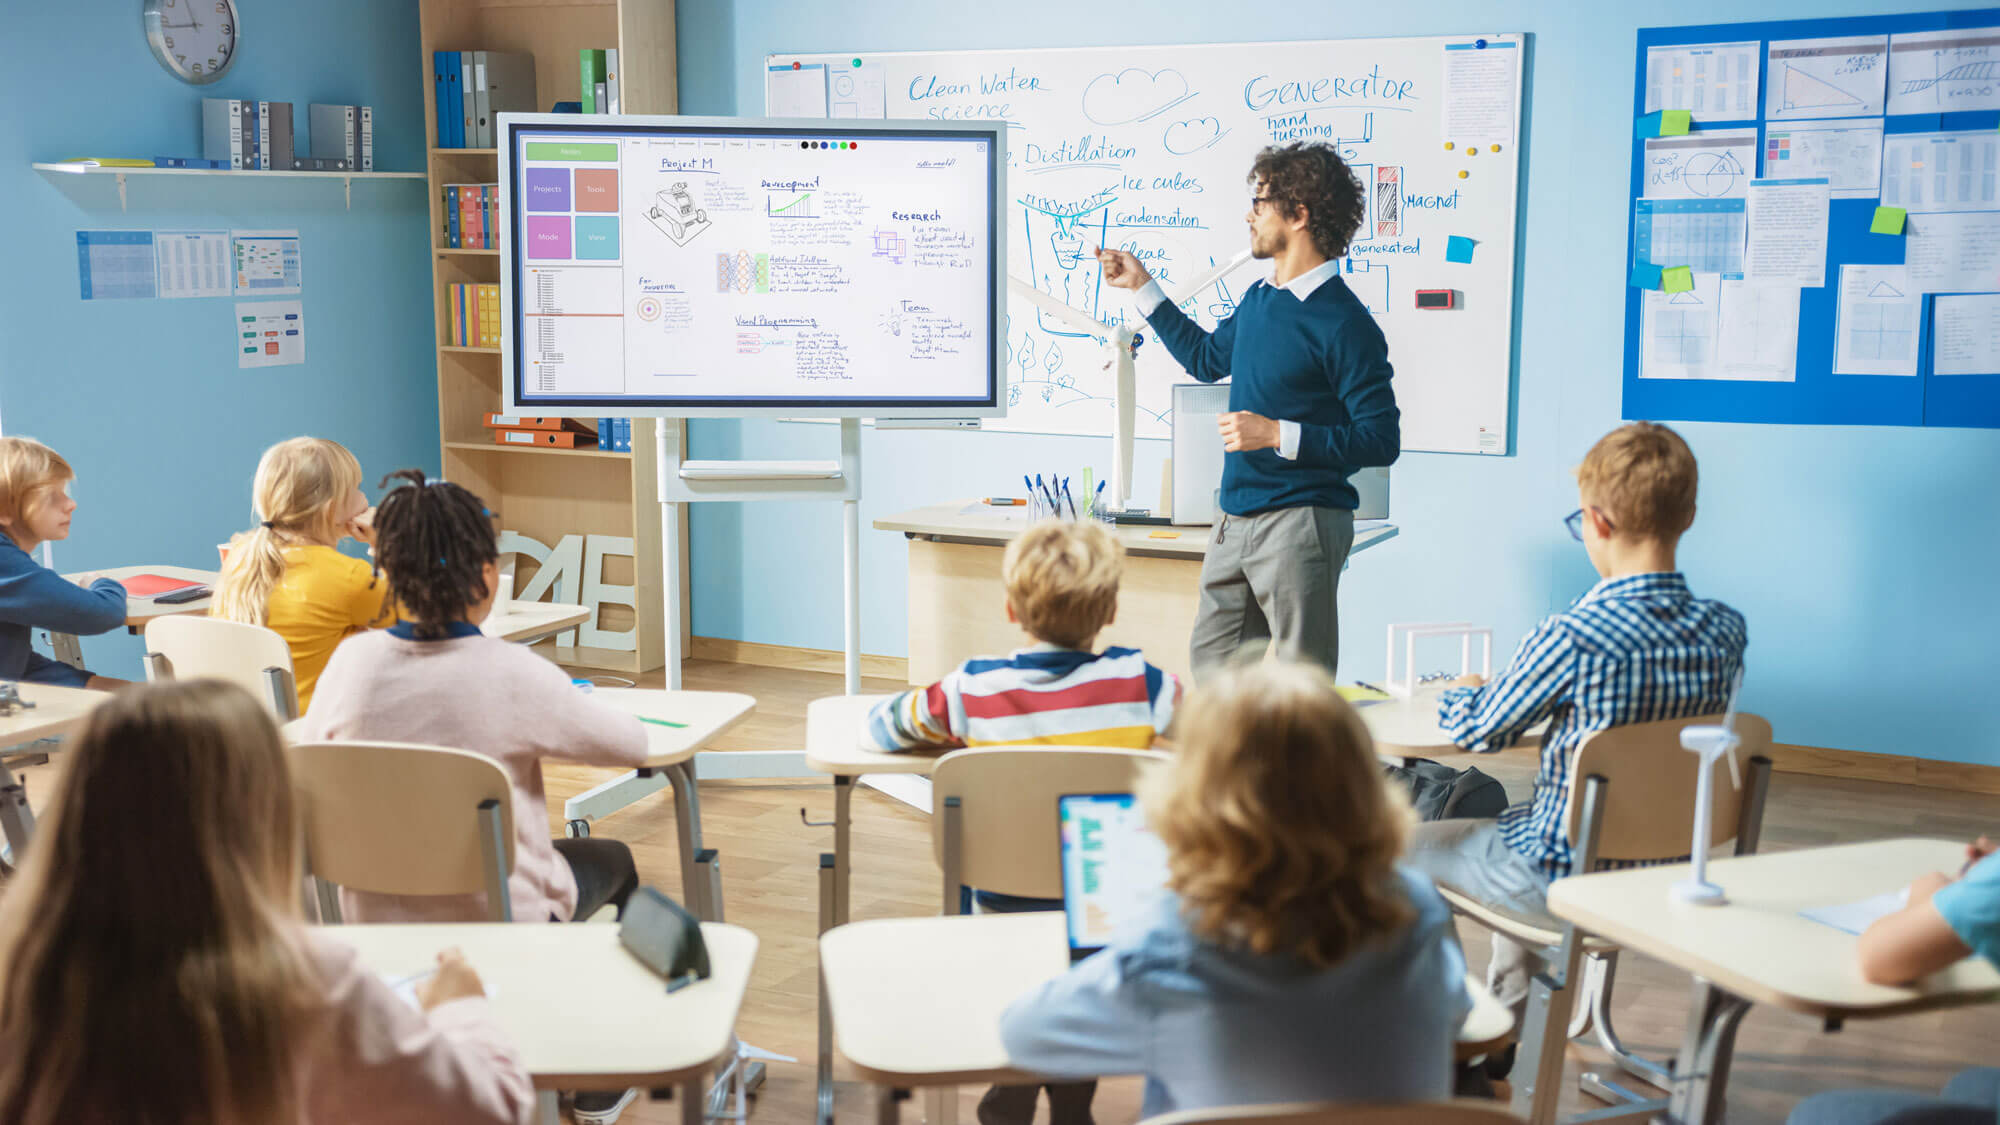 Classroom teacher using an interactive whiteboard to teach pupils using devices.